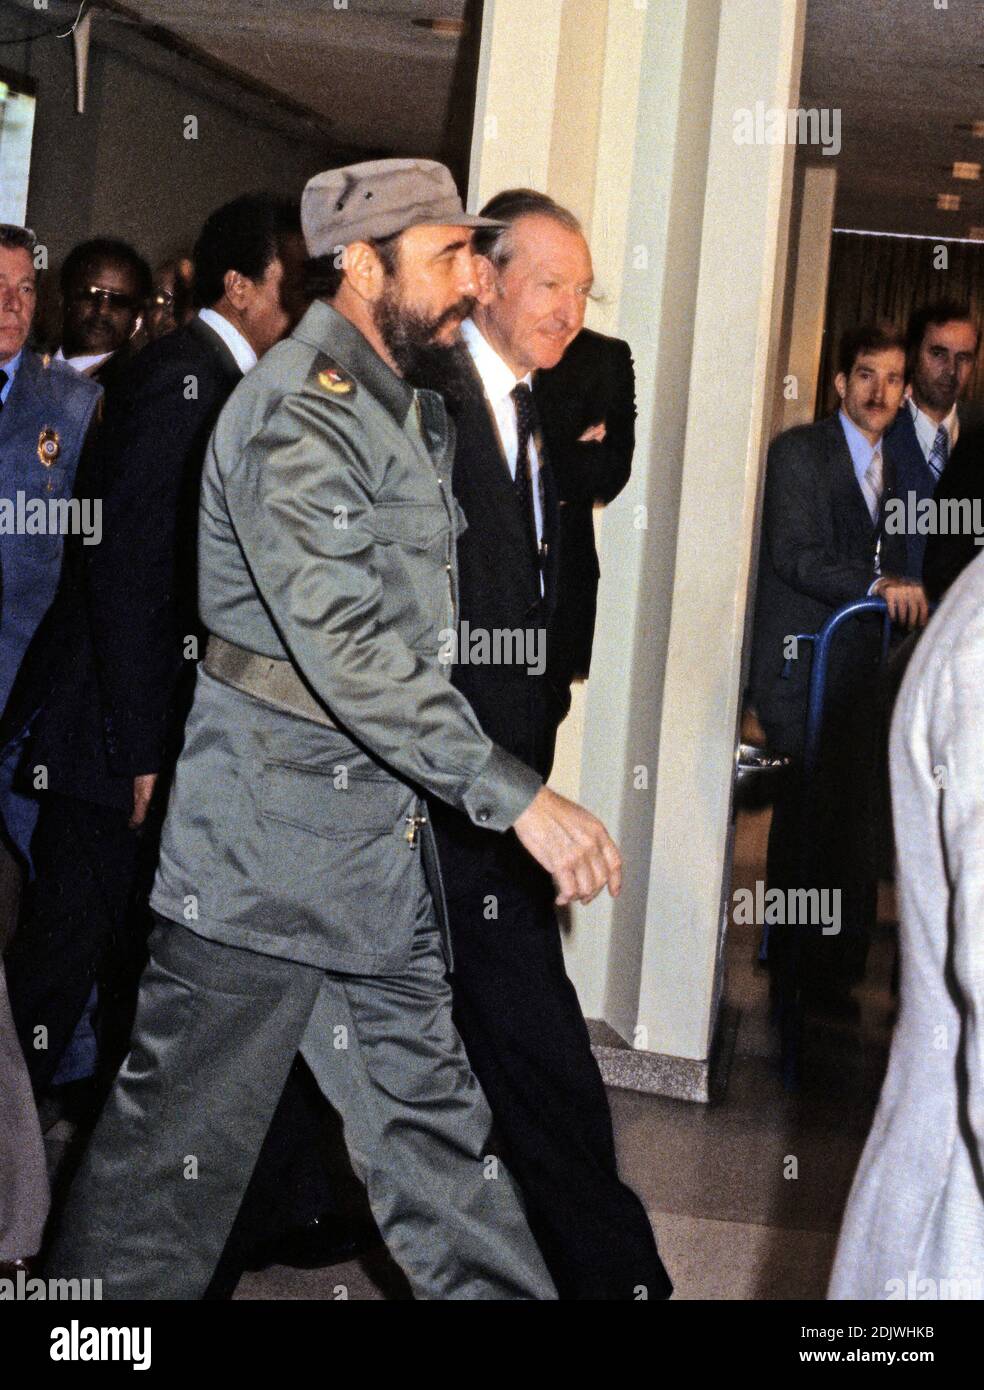 President Fidel Castro of Cuba, left, is escorted by United Nations Secretary-General Kurt Waldheim, right, during his visit to address the UN General Assembly in New York City, NY, USA on October 15, 1979. Castro's speech discussed the disparity between the world's rich and the world's poor. Photo by Arnie Sachs/CNP/ABACAPRESS.COM Stock Photo